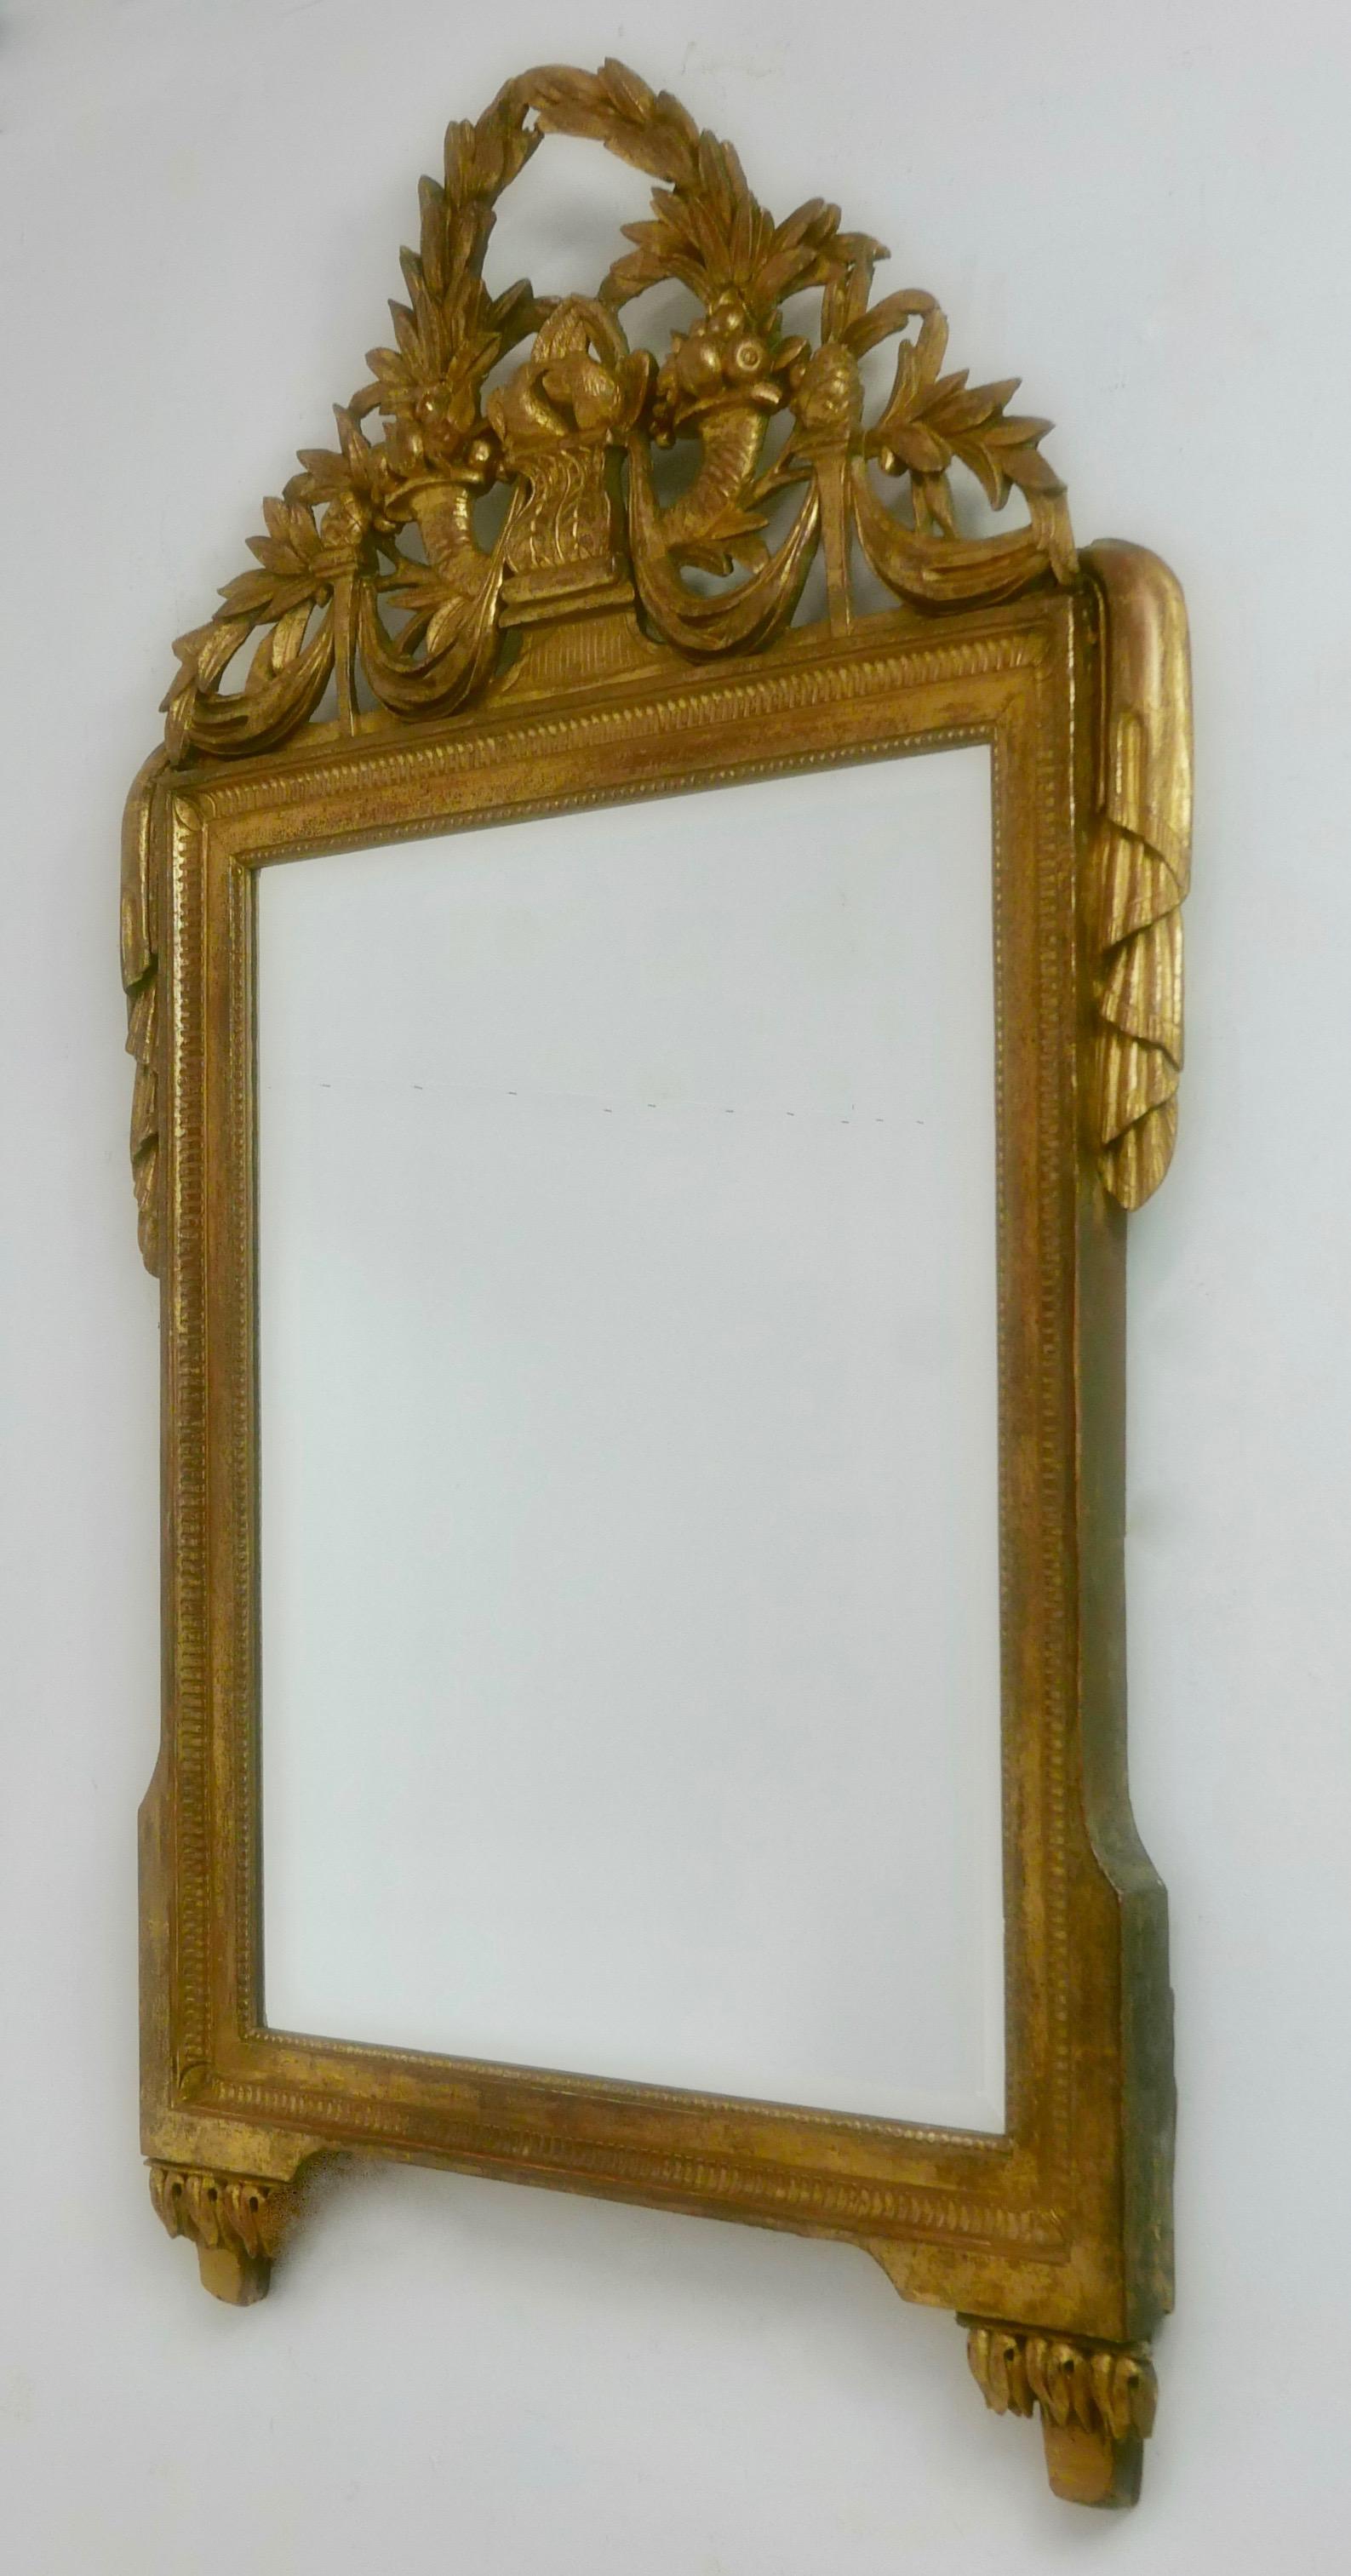 Louis XVI Period Carved and Gilded Wood Framed Beveled Mirror For Sale 4